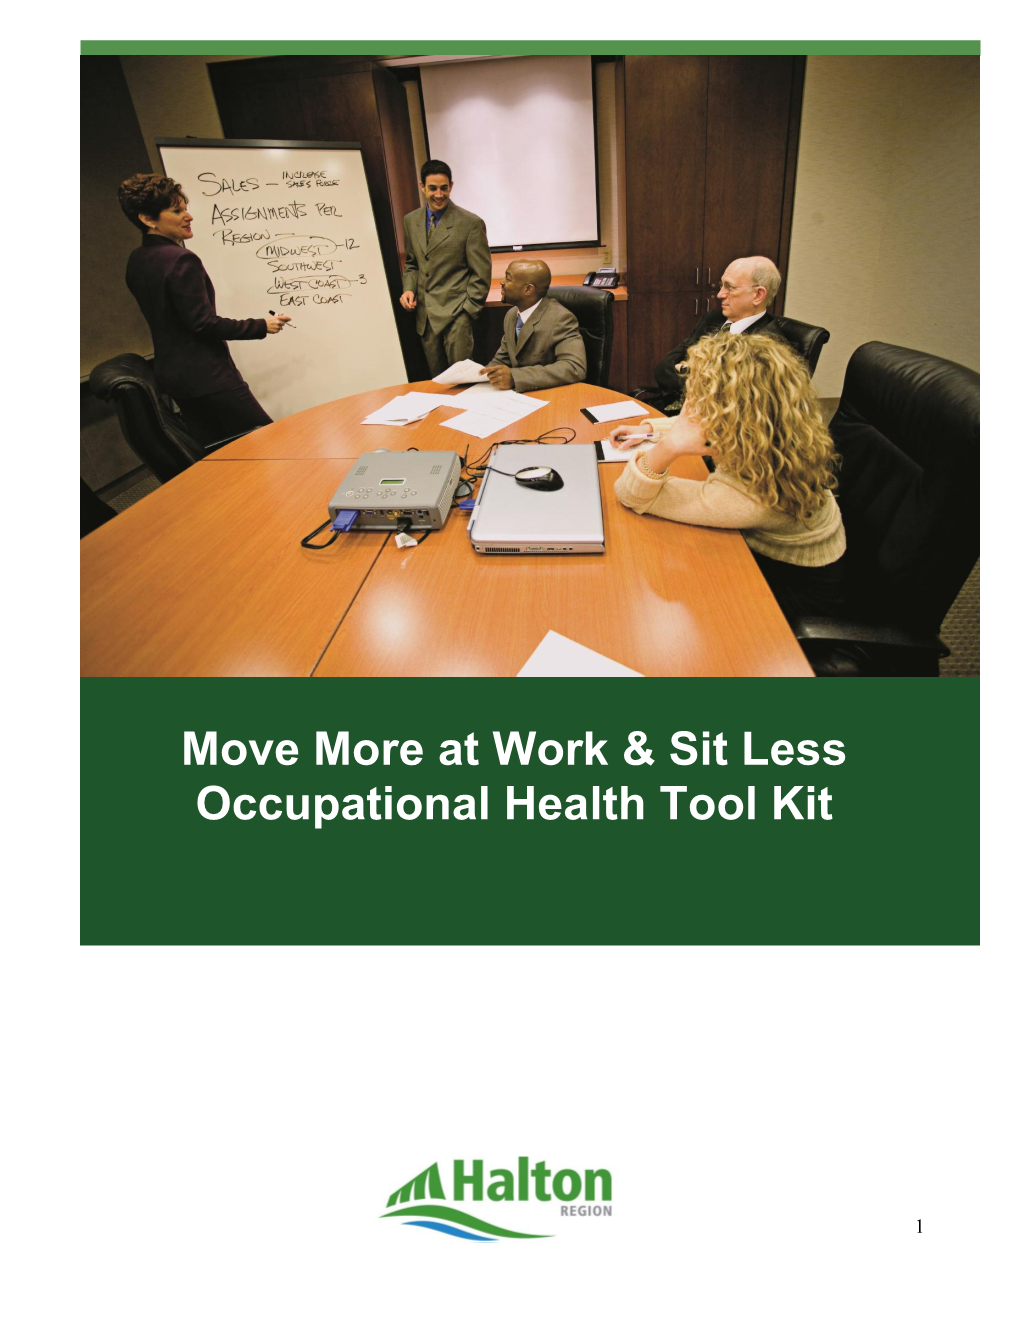 Move More at Work & Sit Less Occupational Health Tool